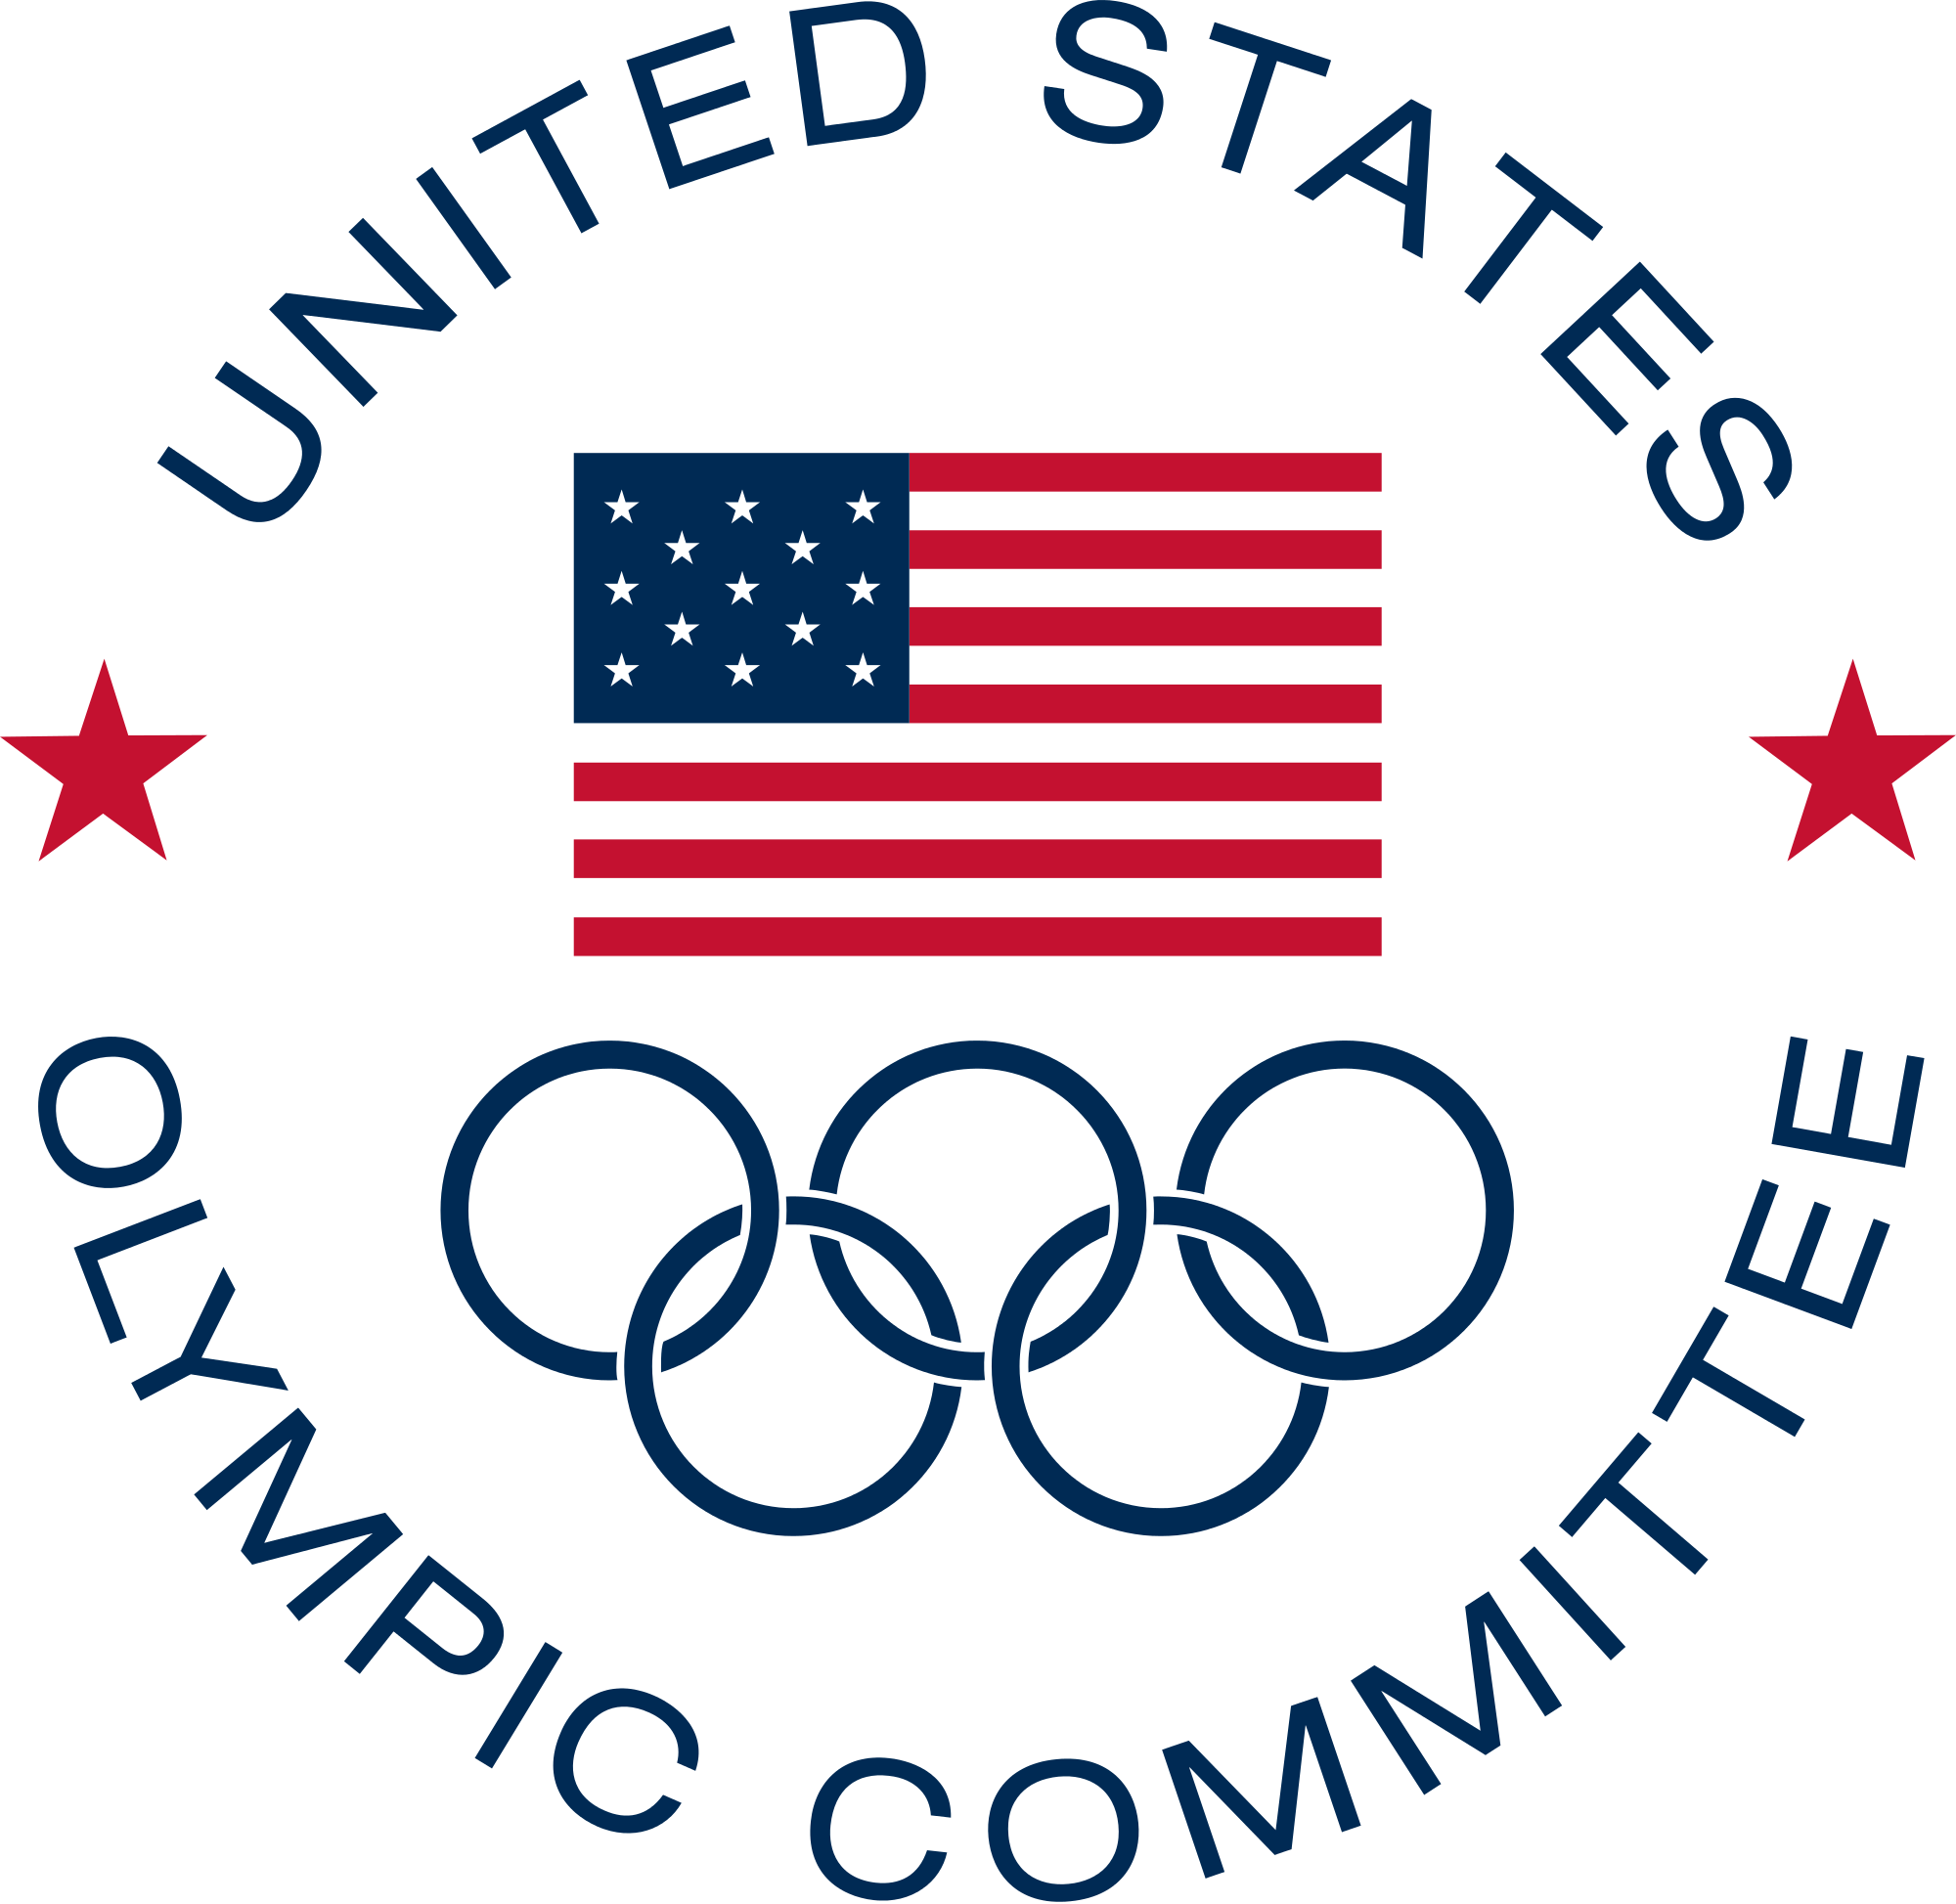 usa clipart olympic swimming